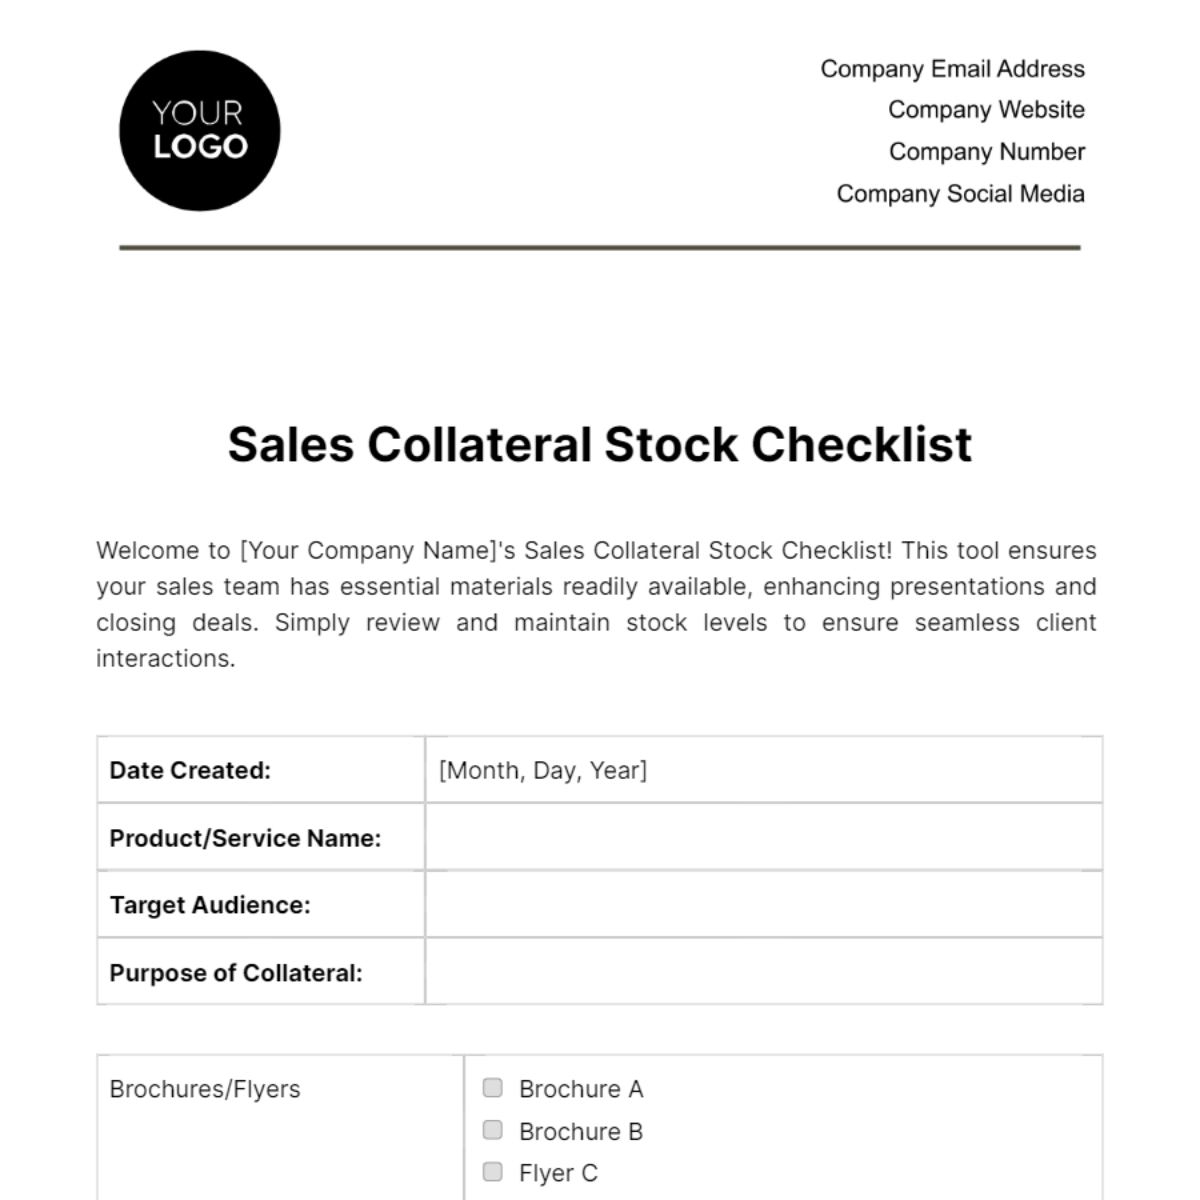 Free Sales Collateral Stock Checklist Template